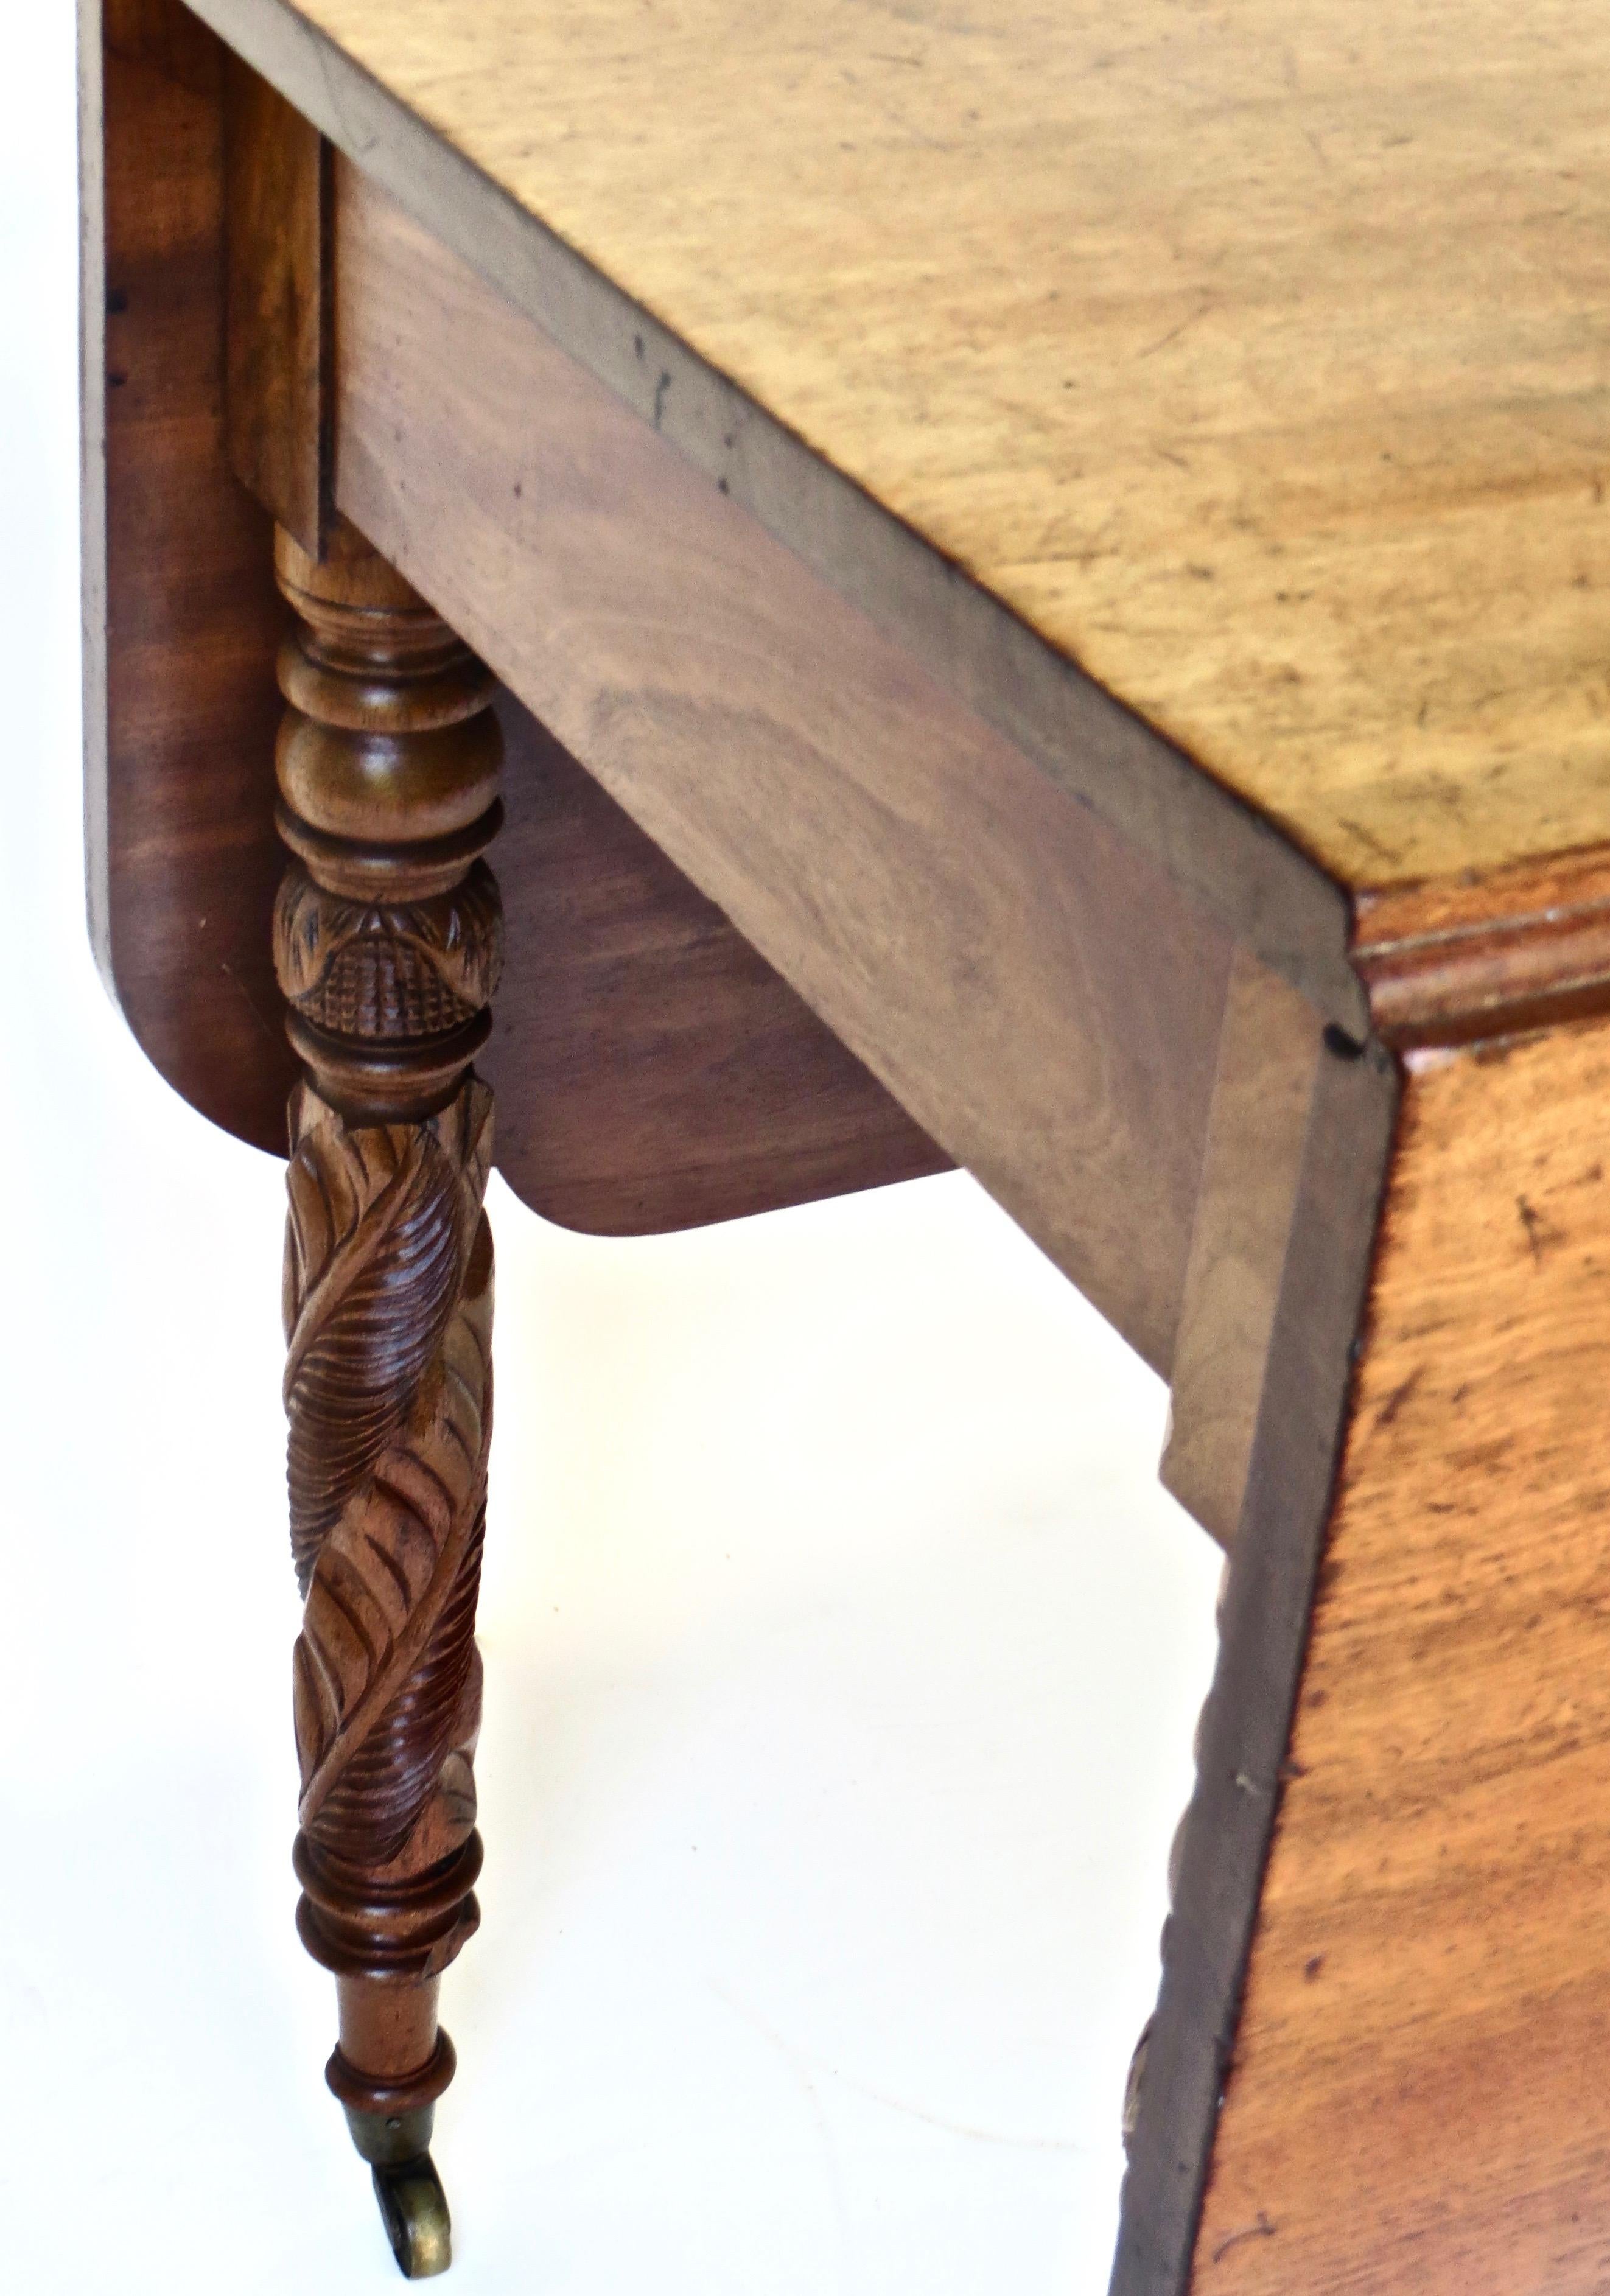 Nicely proportioned and well made early 19th century American mahogany drop leaf table with no restorations and in completely original condition and untouched surface.
The entire surface has mellowed to a beautiful patina; their are several